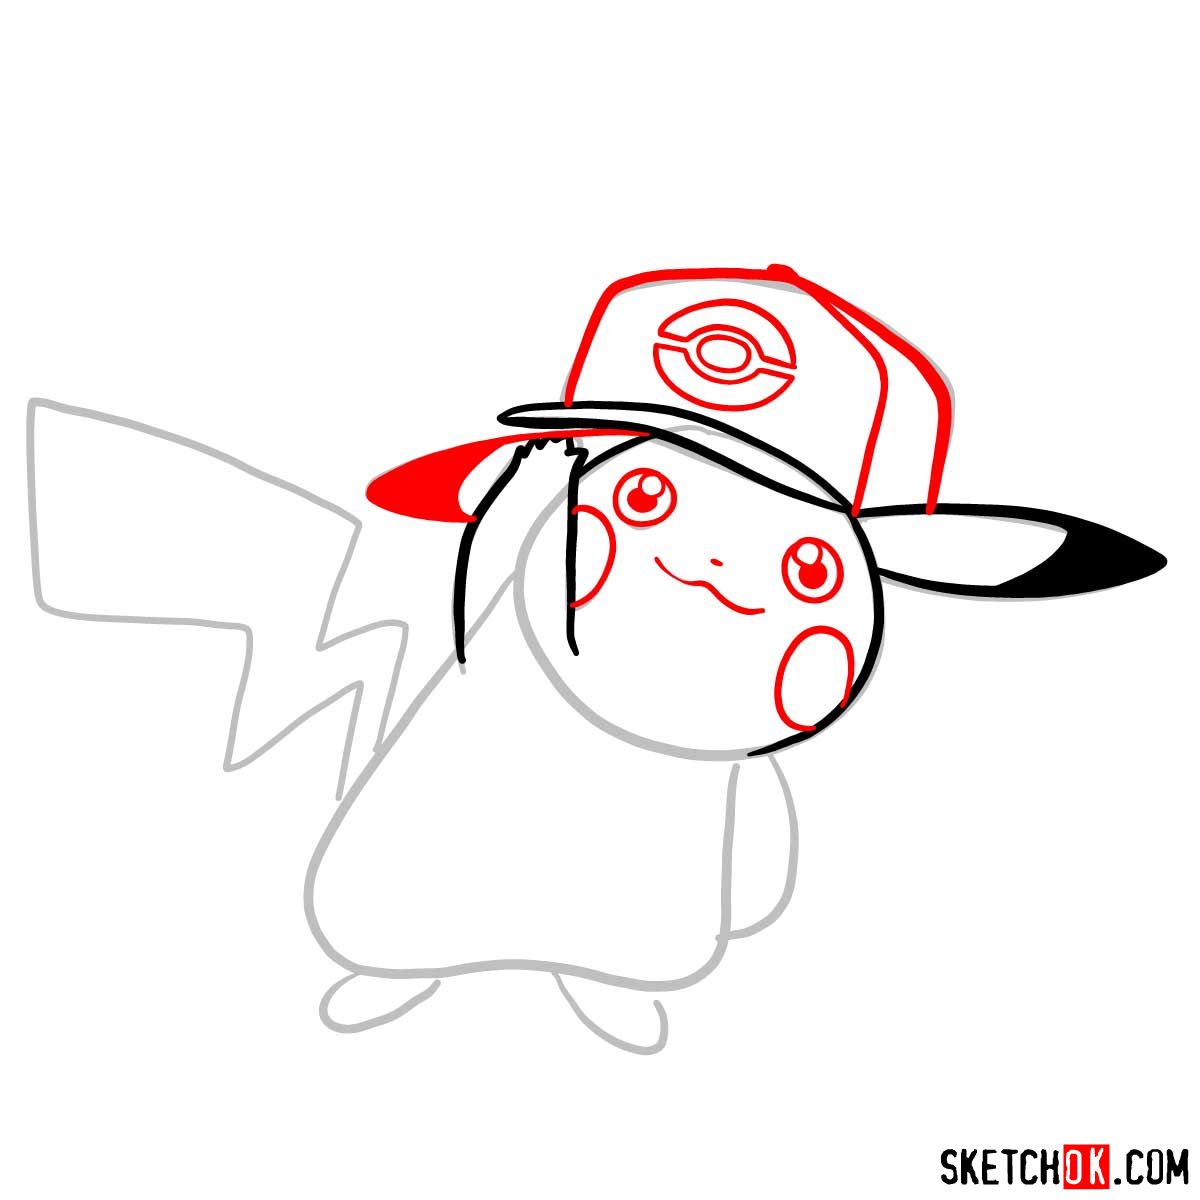 How to draw Pikachu in a cap with pokeball logo - step 05